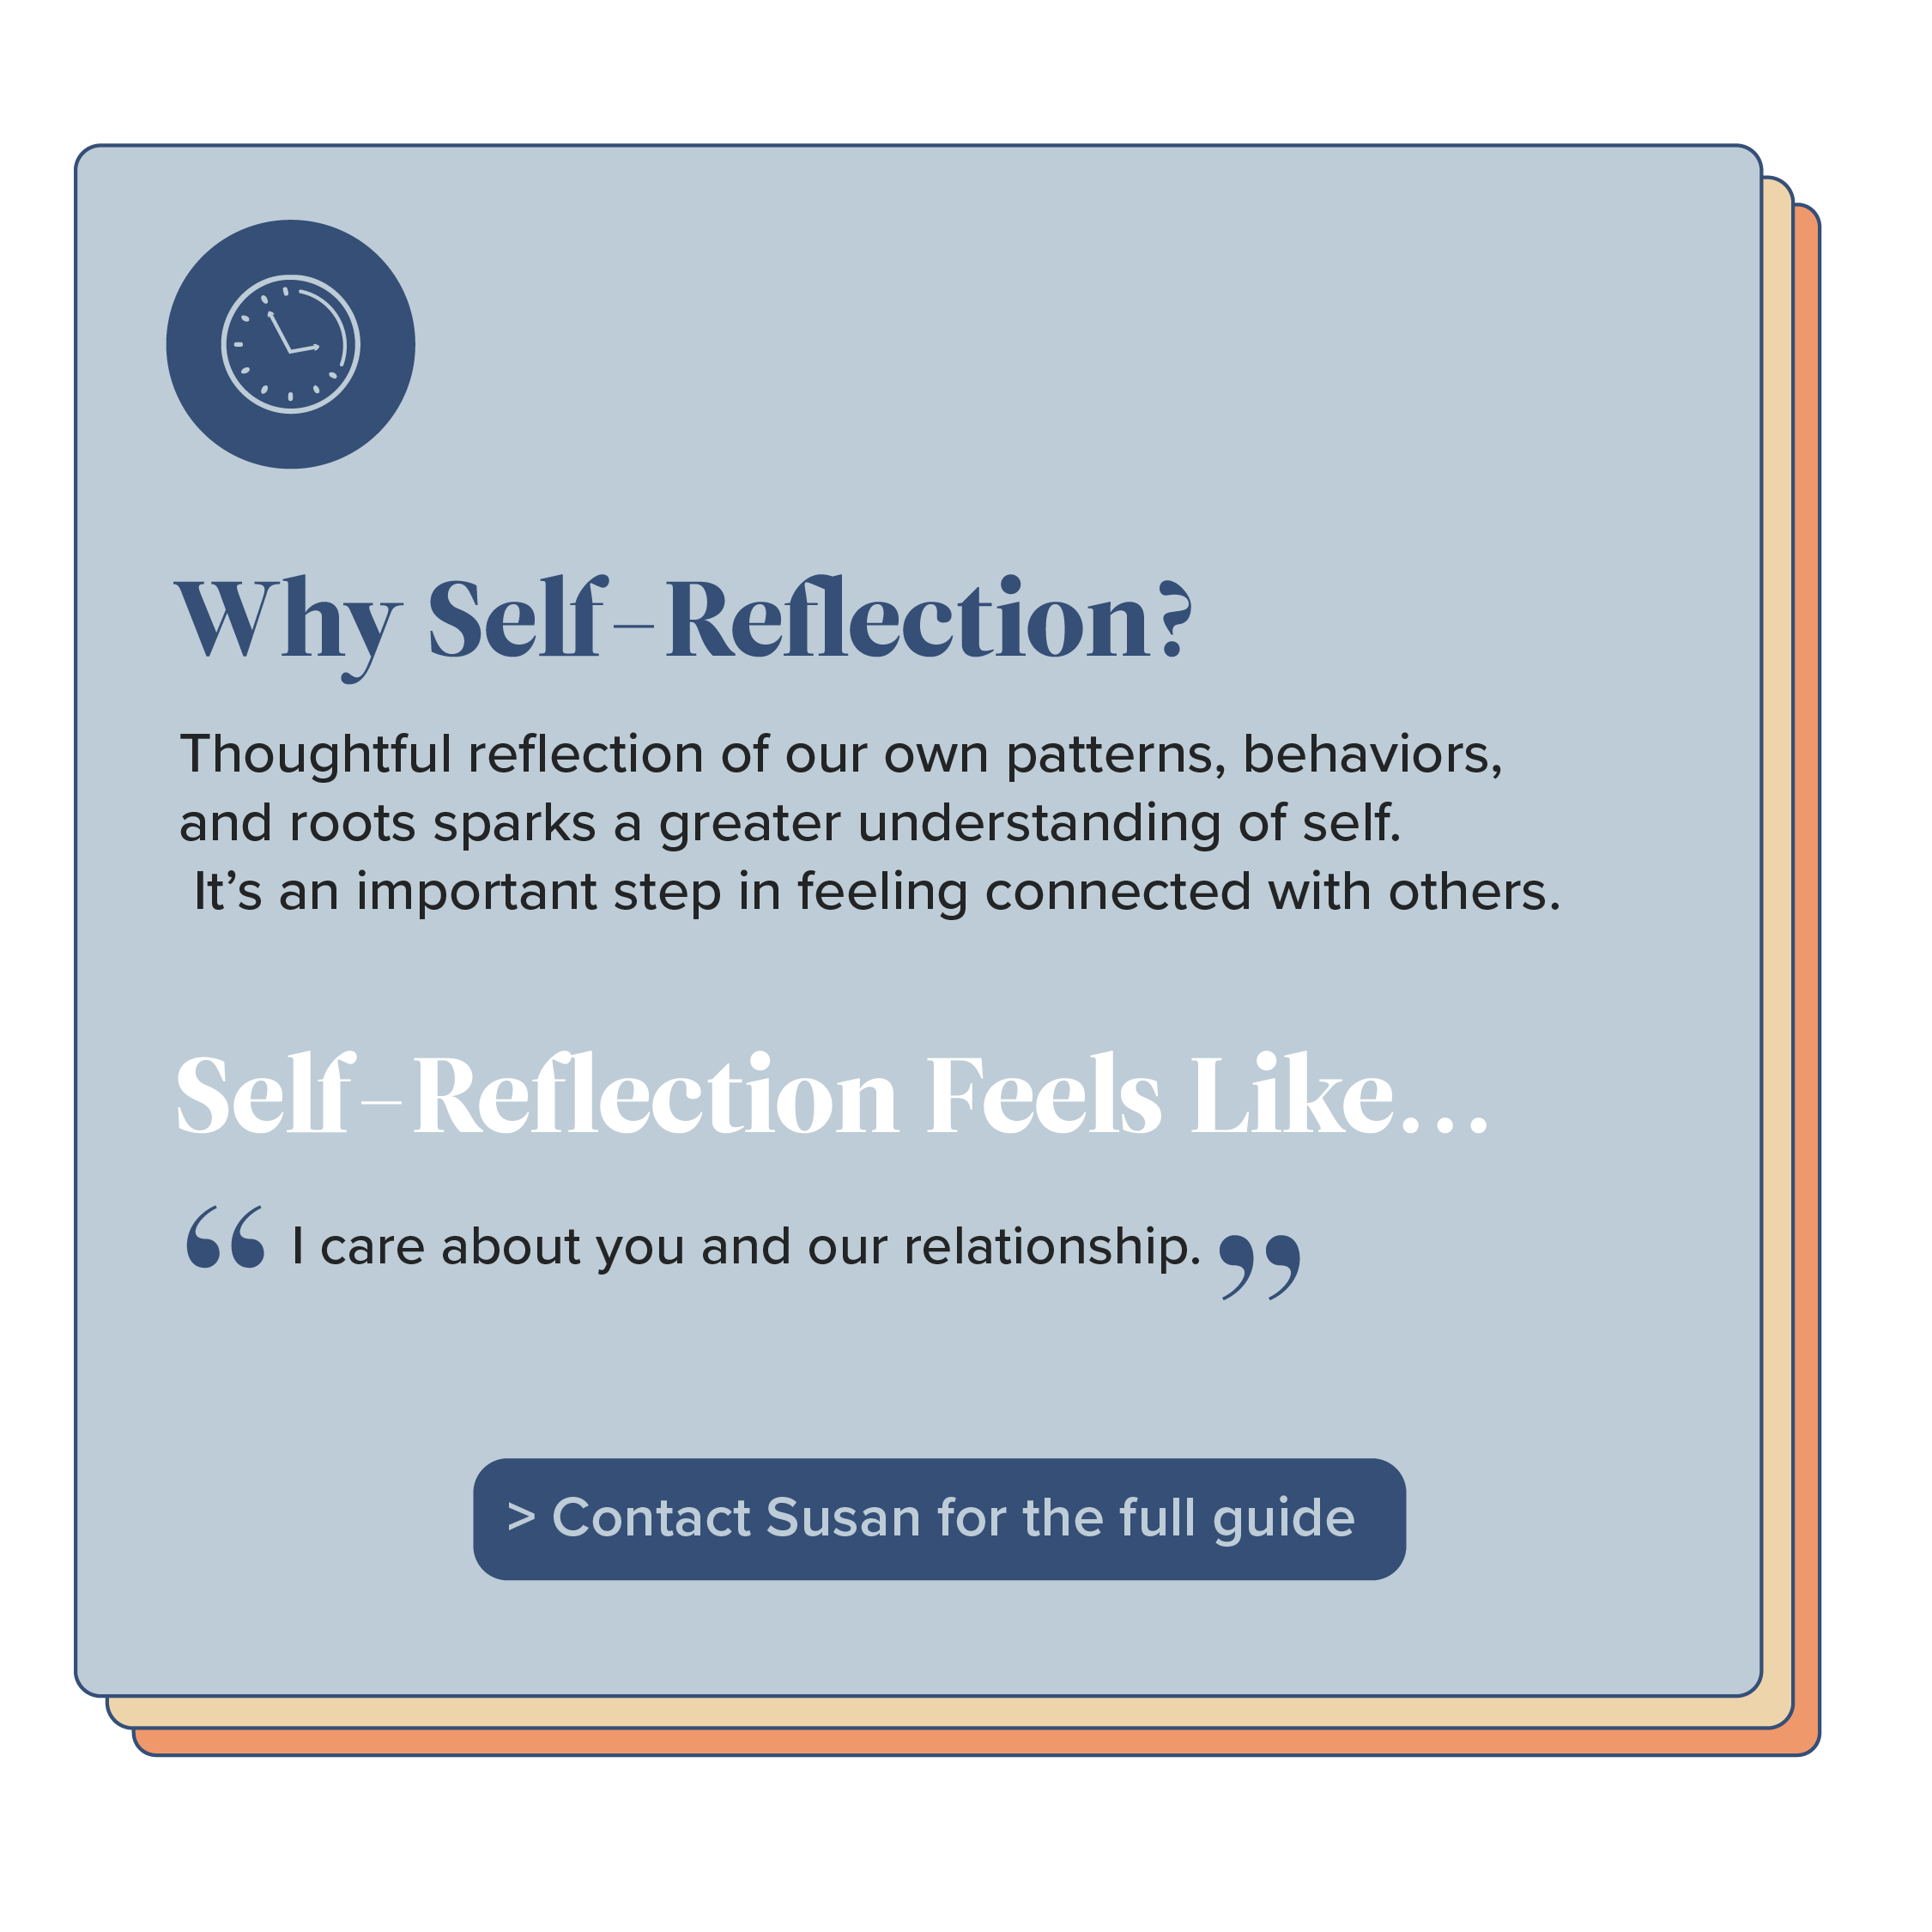 Thoughtful reflection of your own patterns, behaviors, and roots can lead you to create a better understanding of yourself. That’s an important step to feel more connected with others.